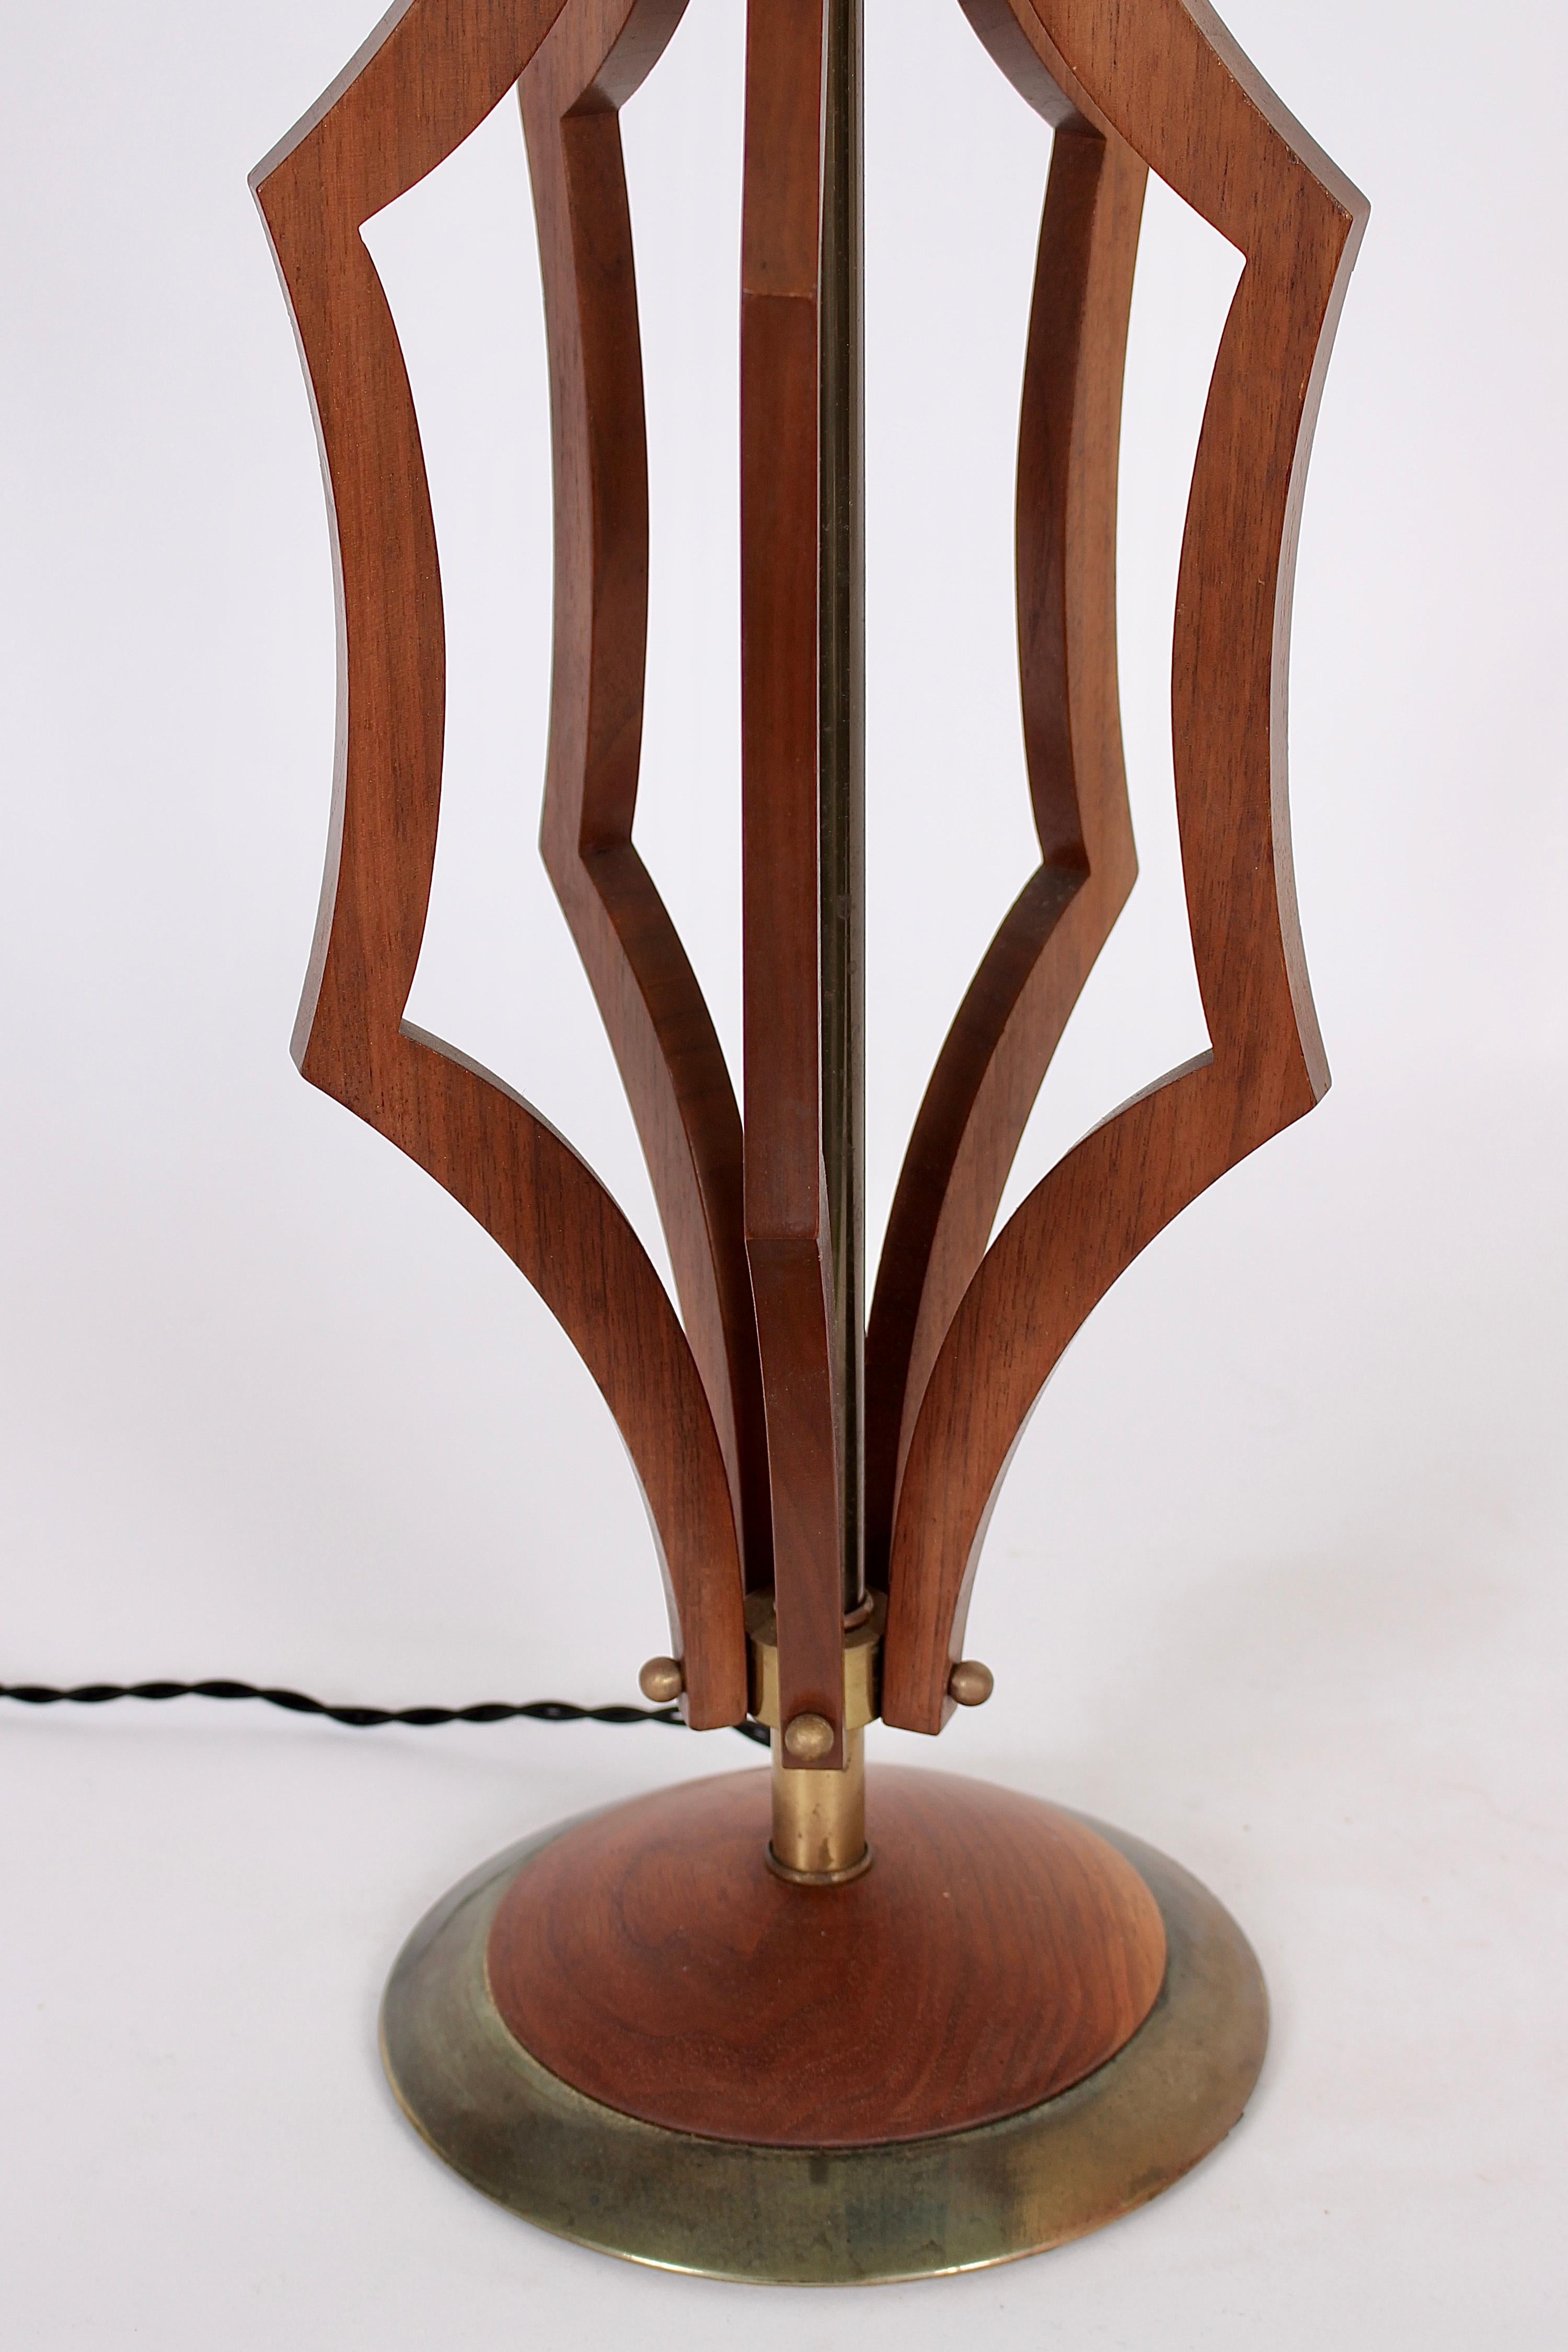 20th Century Monumental American Mid Century Geometric Cut Out Walnut Table Lamp, circa 1960 For Sale